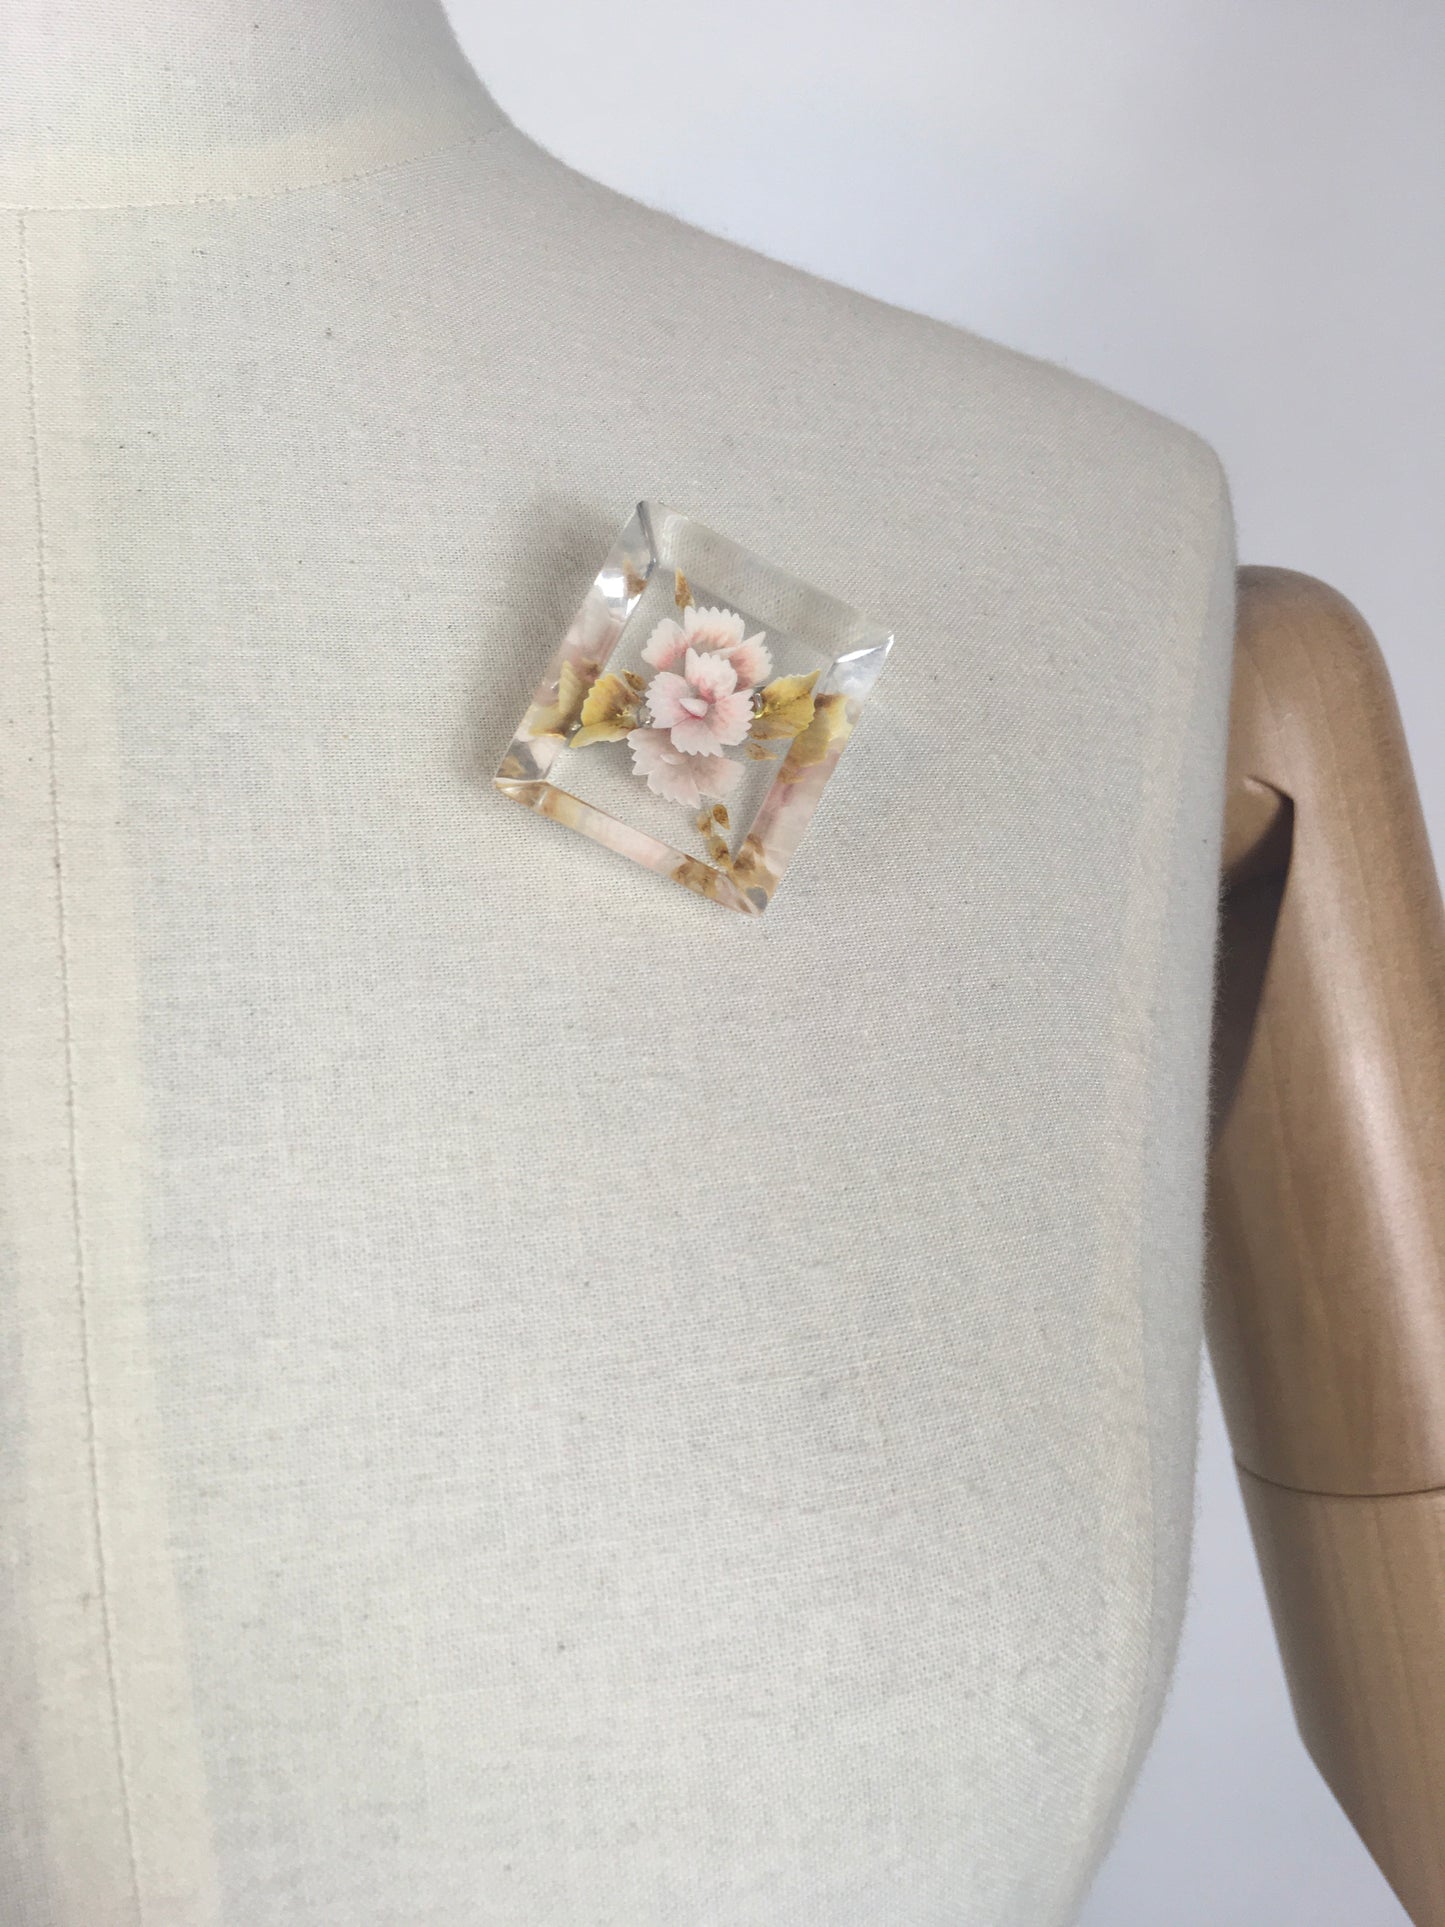 Original 1940’s / 1950’s Floral Lucite Brooch - In A Lovely Soft Pink & Muted Green